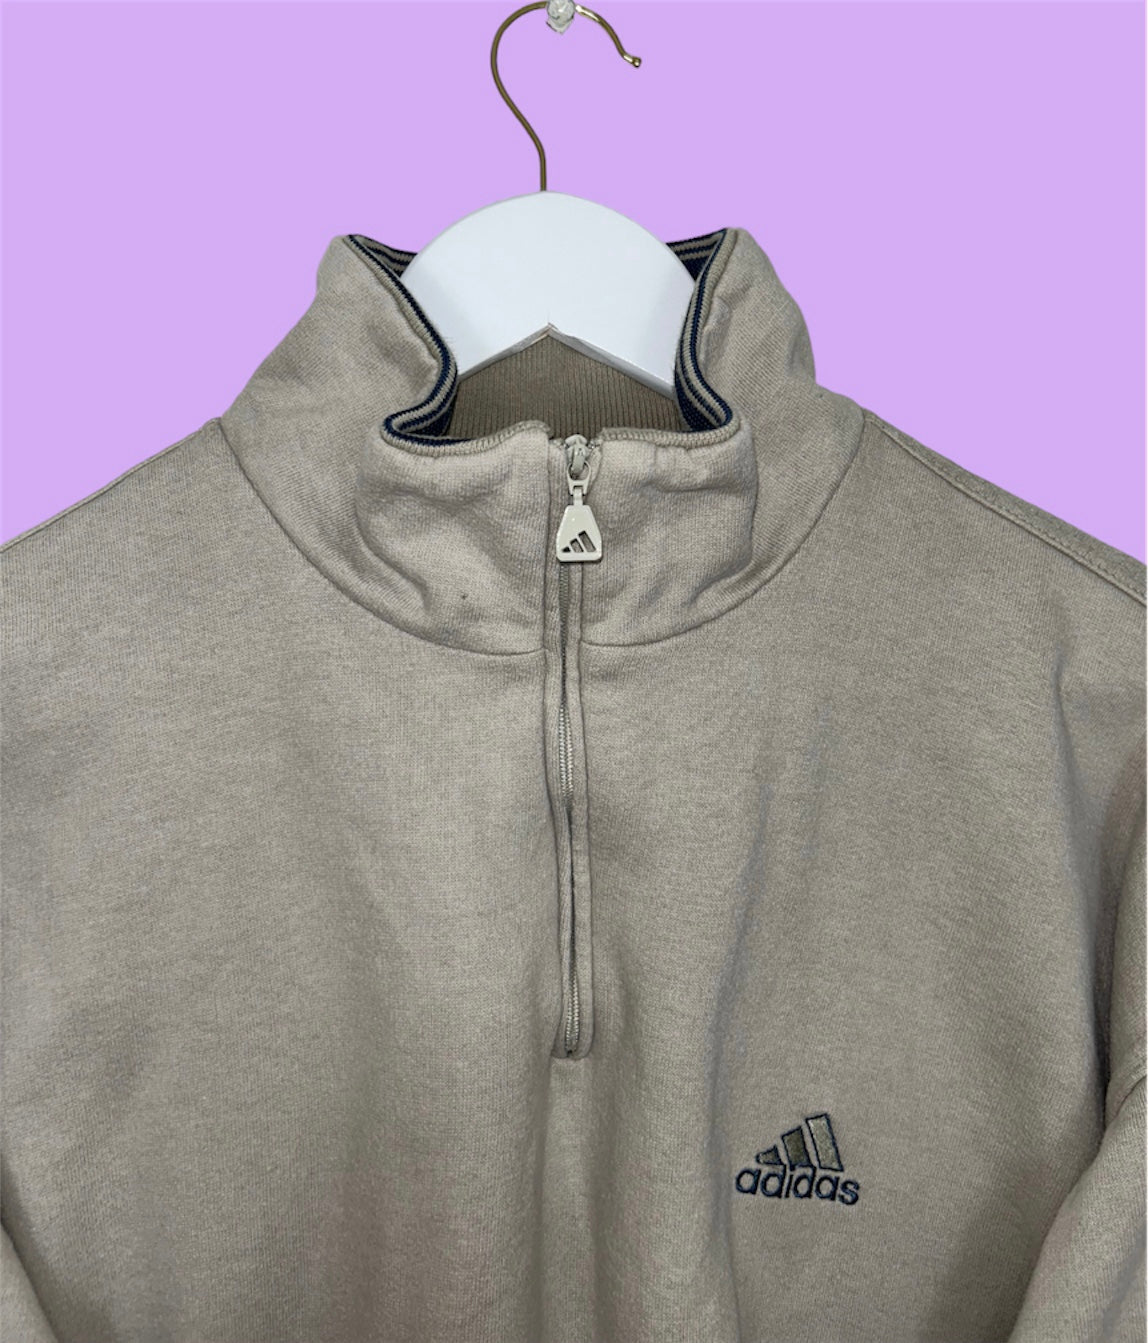 close up of beige 1/4 zip sweatshirt with small adidas logo shown on a lilac background